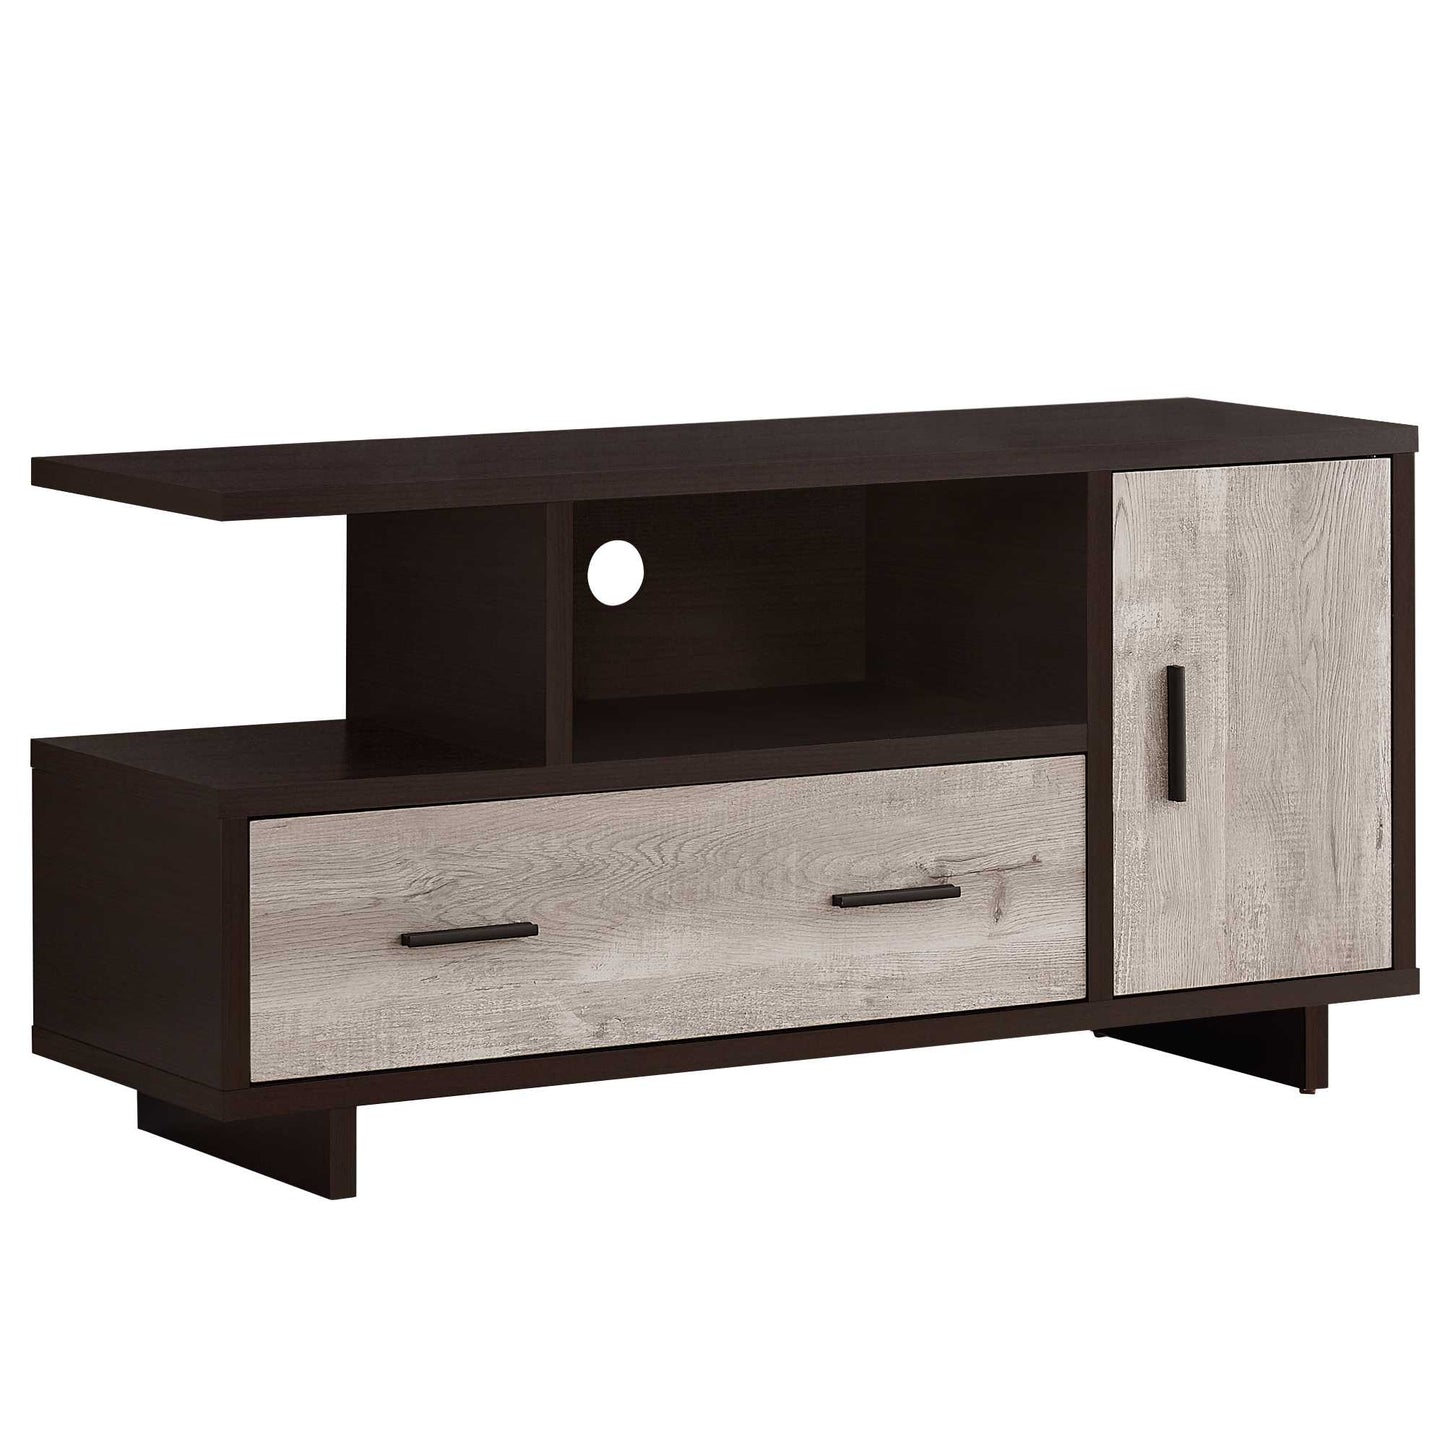 16" Wood Brown Cabinet Enclosed Storage TV Stand